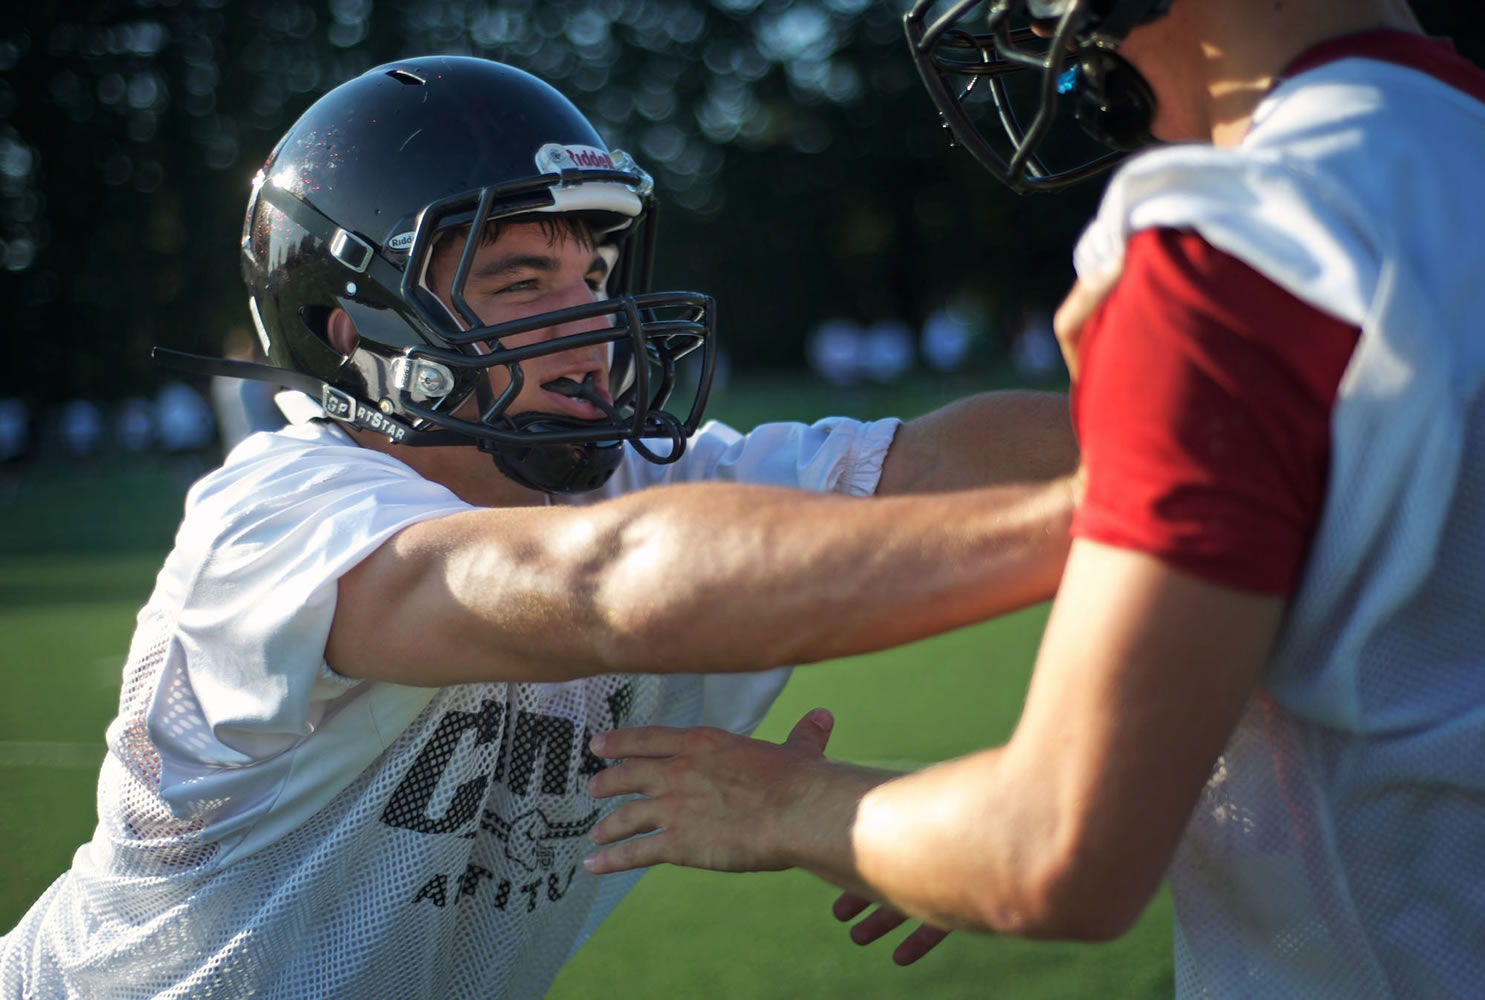 Camas junior linebacker Michael DiGenova is what coach Jon Eagle calls a &quot;prototype&quot; for the Papermakers' defense in that DiGenova has the size, speed and strength to make a difference.